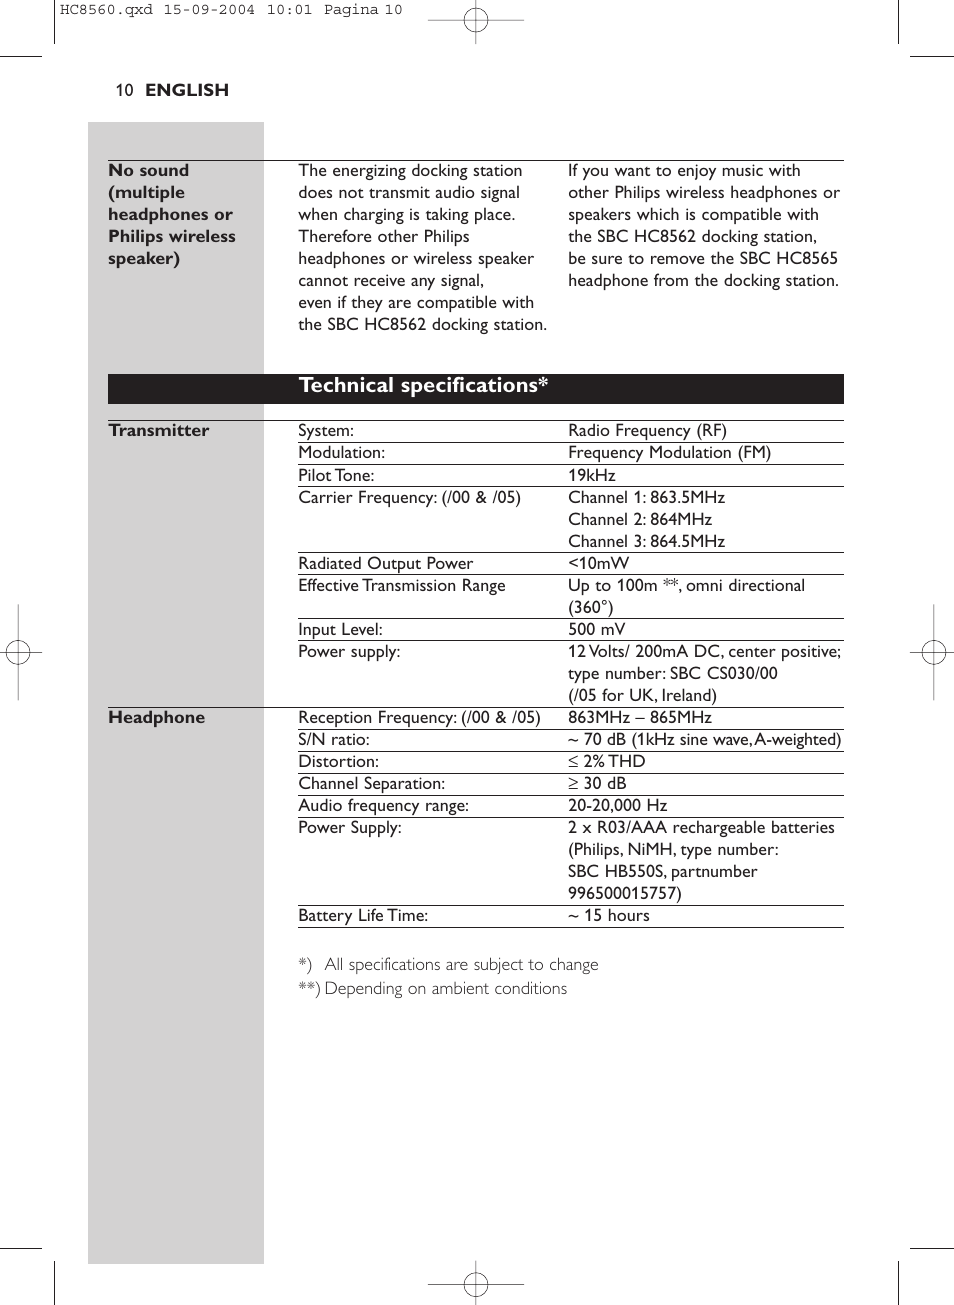 Technical specifications | Philips HC 8560 User Manual | Page 10 / 142